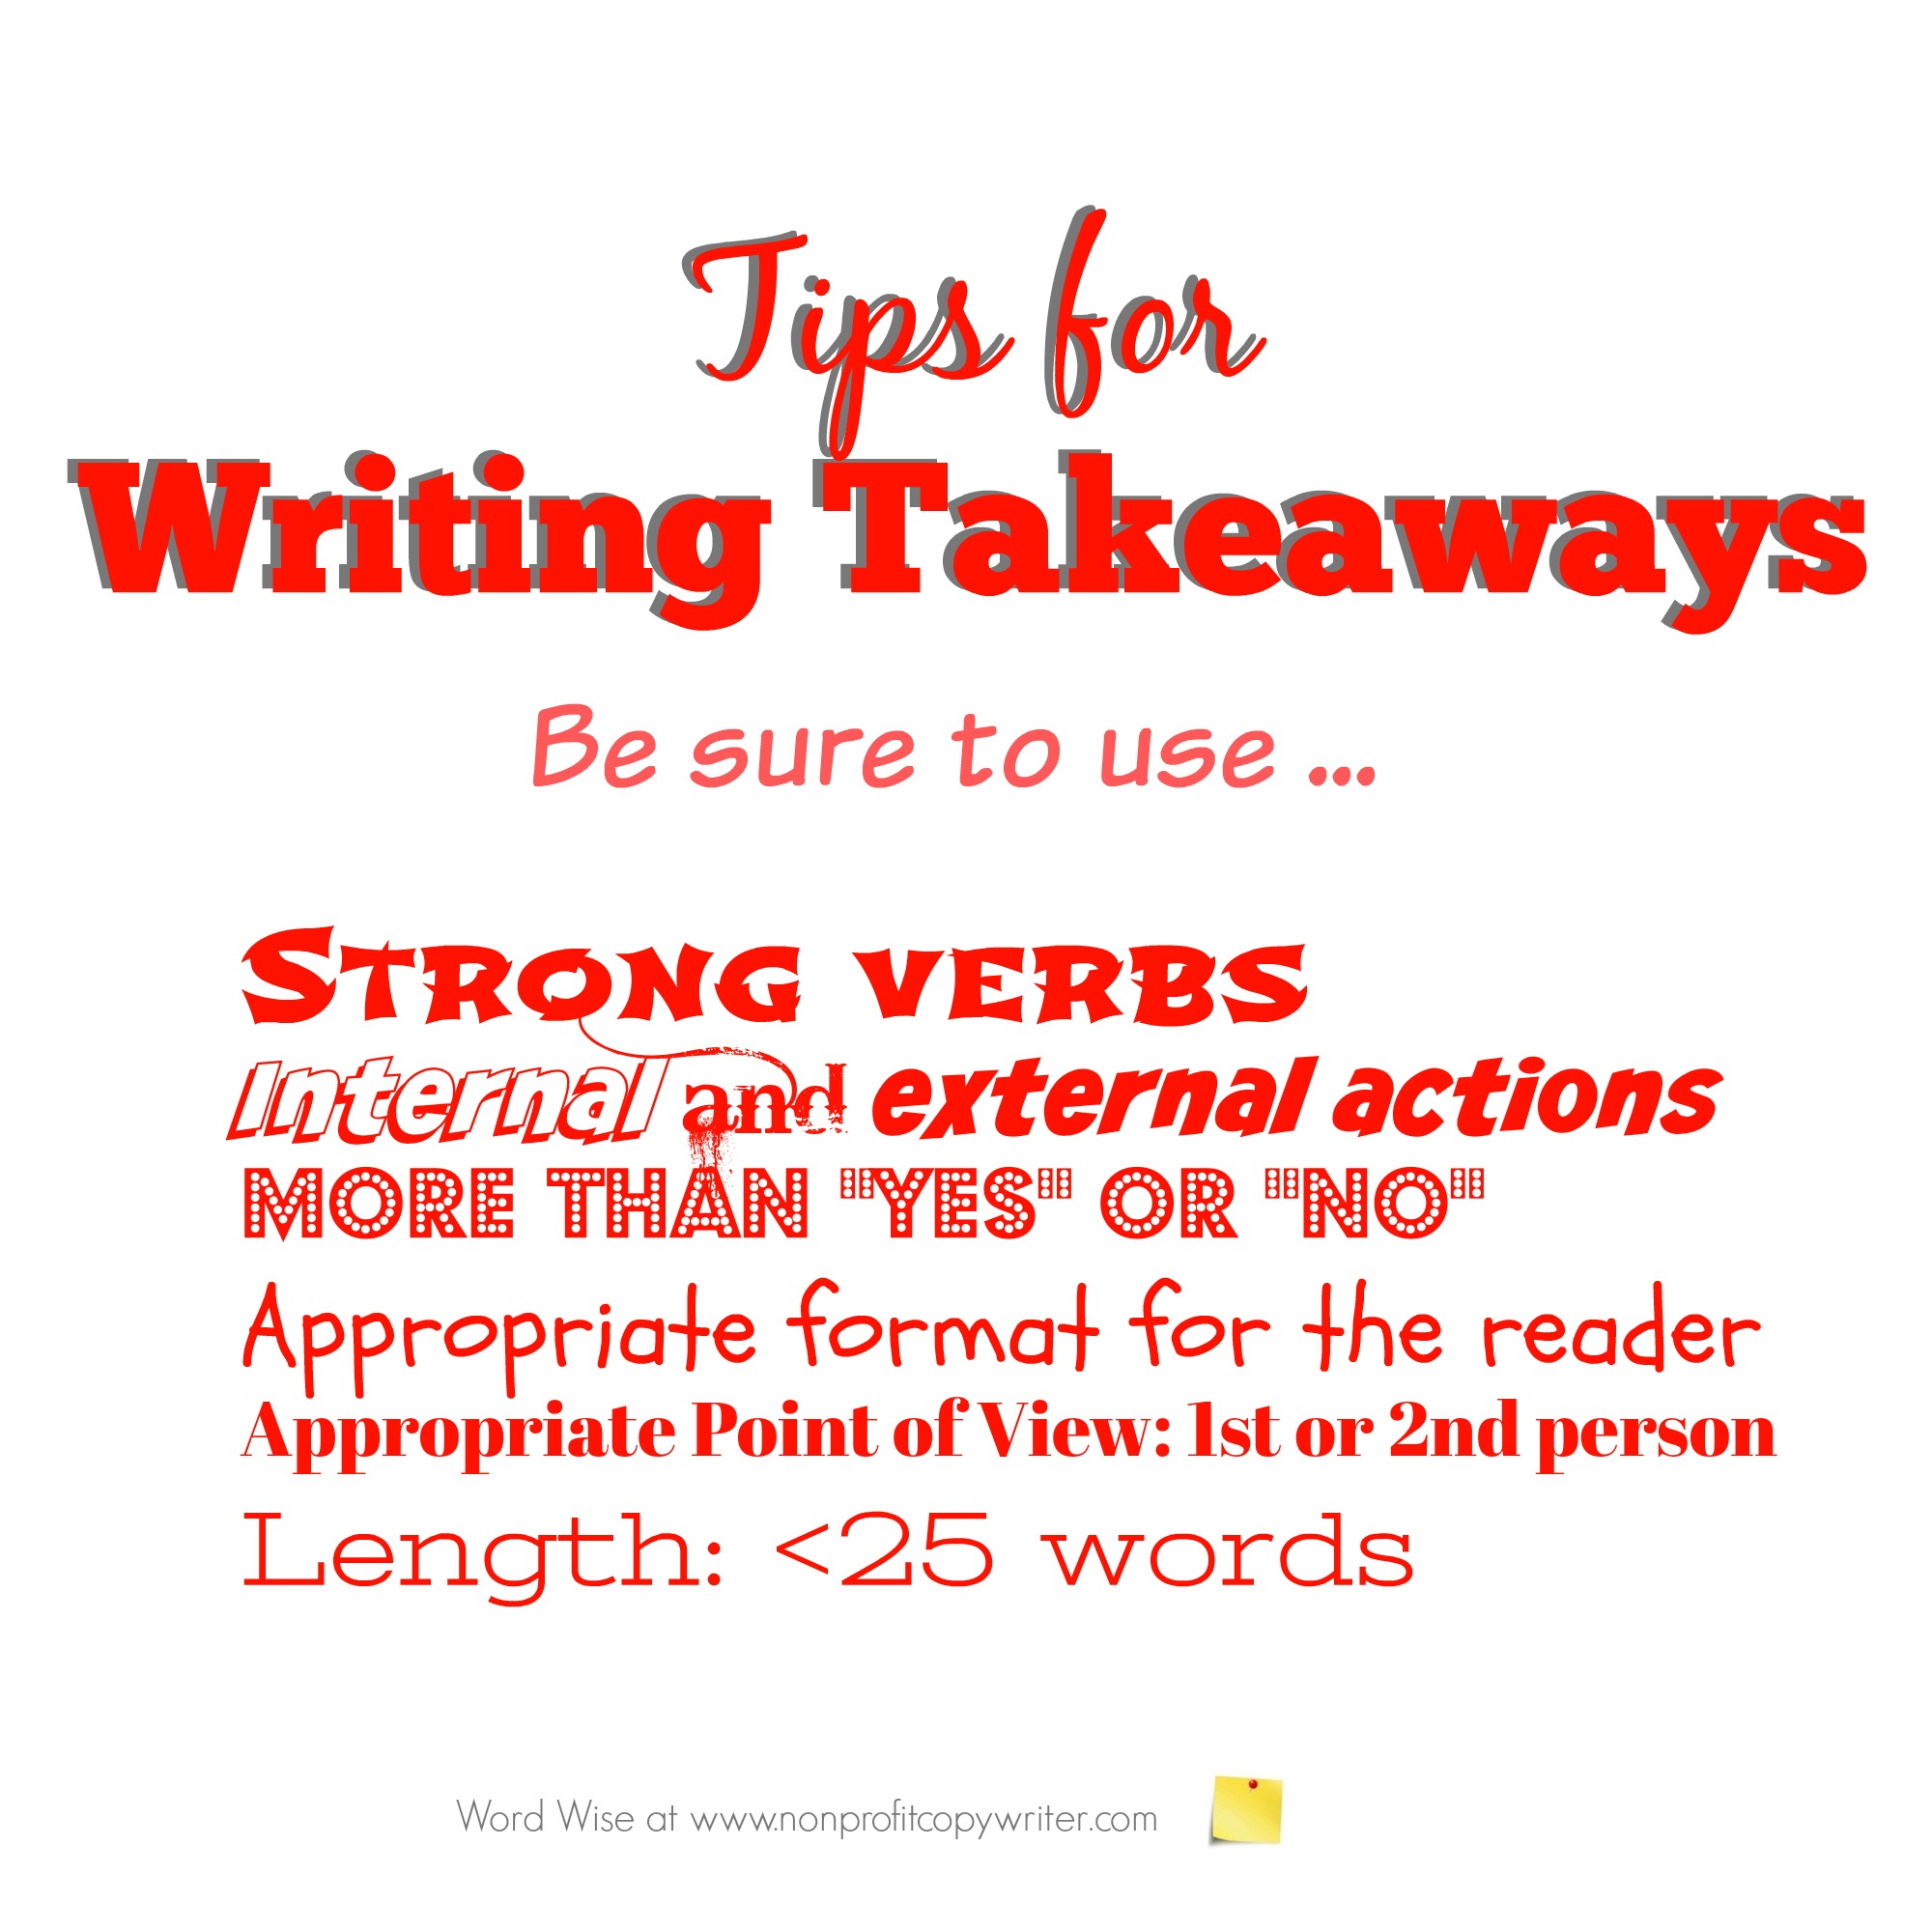 Tips for writing takeaways for devotionals with Word Wise at Nonprofit Copywriter